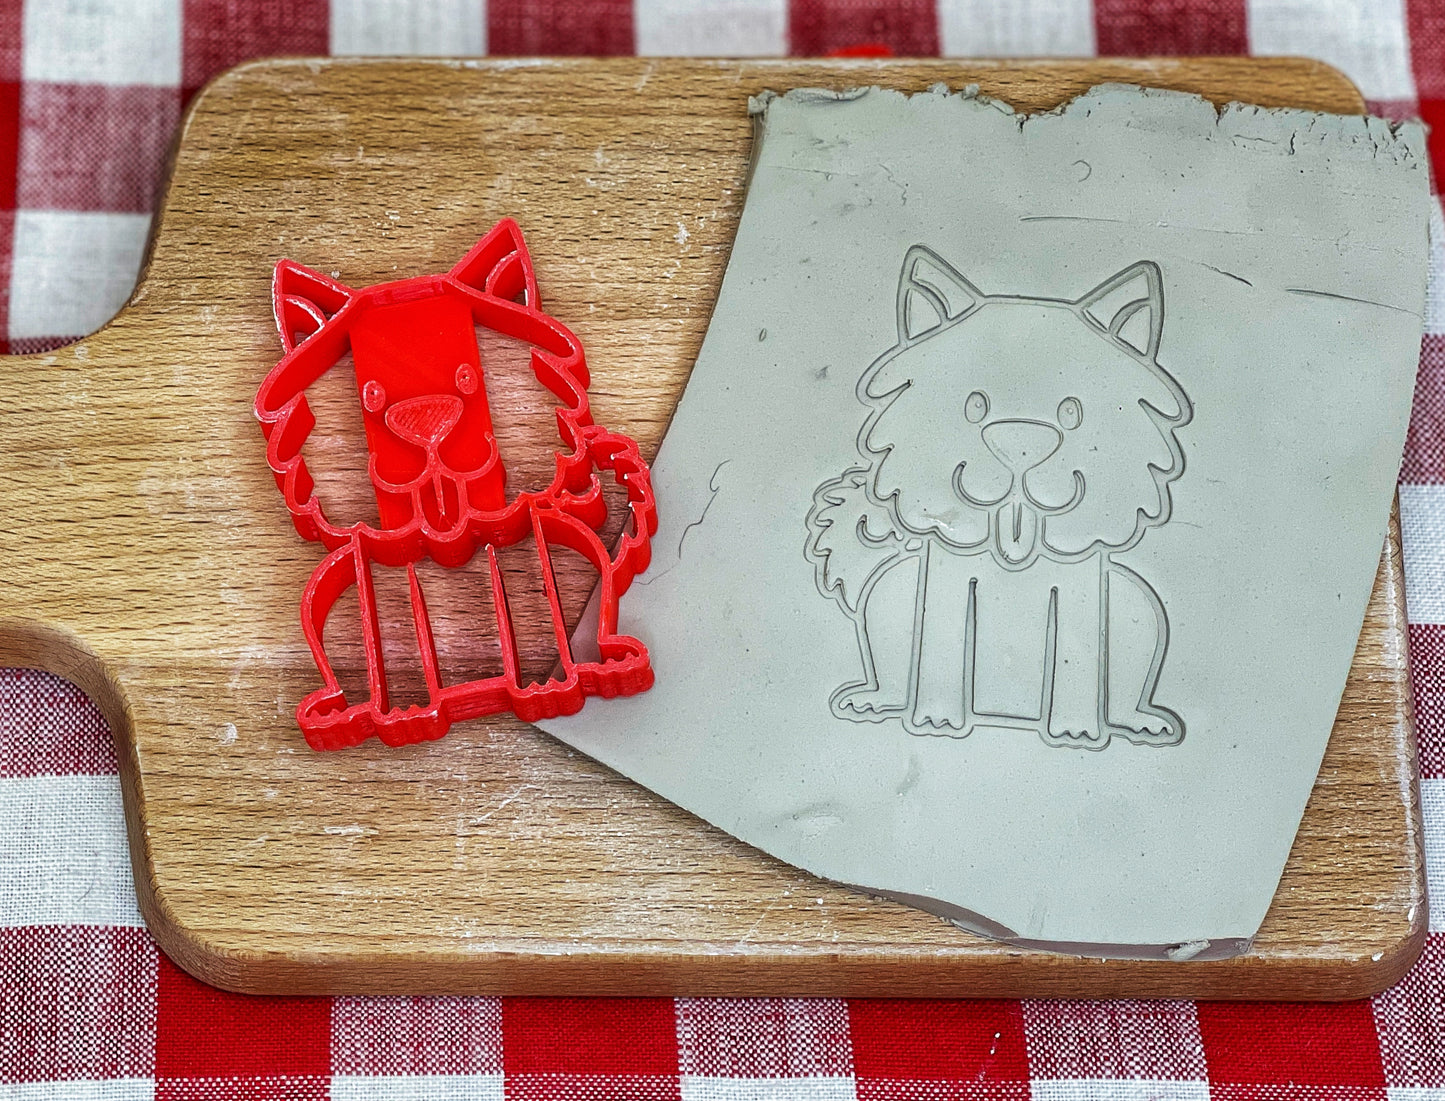 Fluffy Dog 2 Reversible Pottery Stamp - Pet doodle series, 3D Printed, Multiple Sizes Available